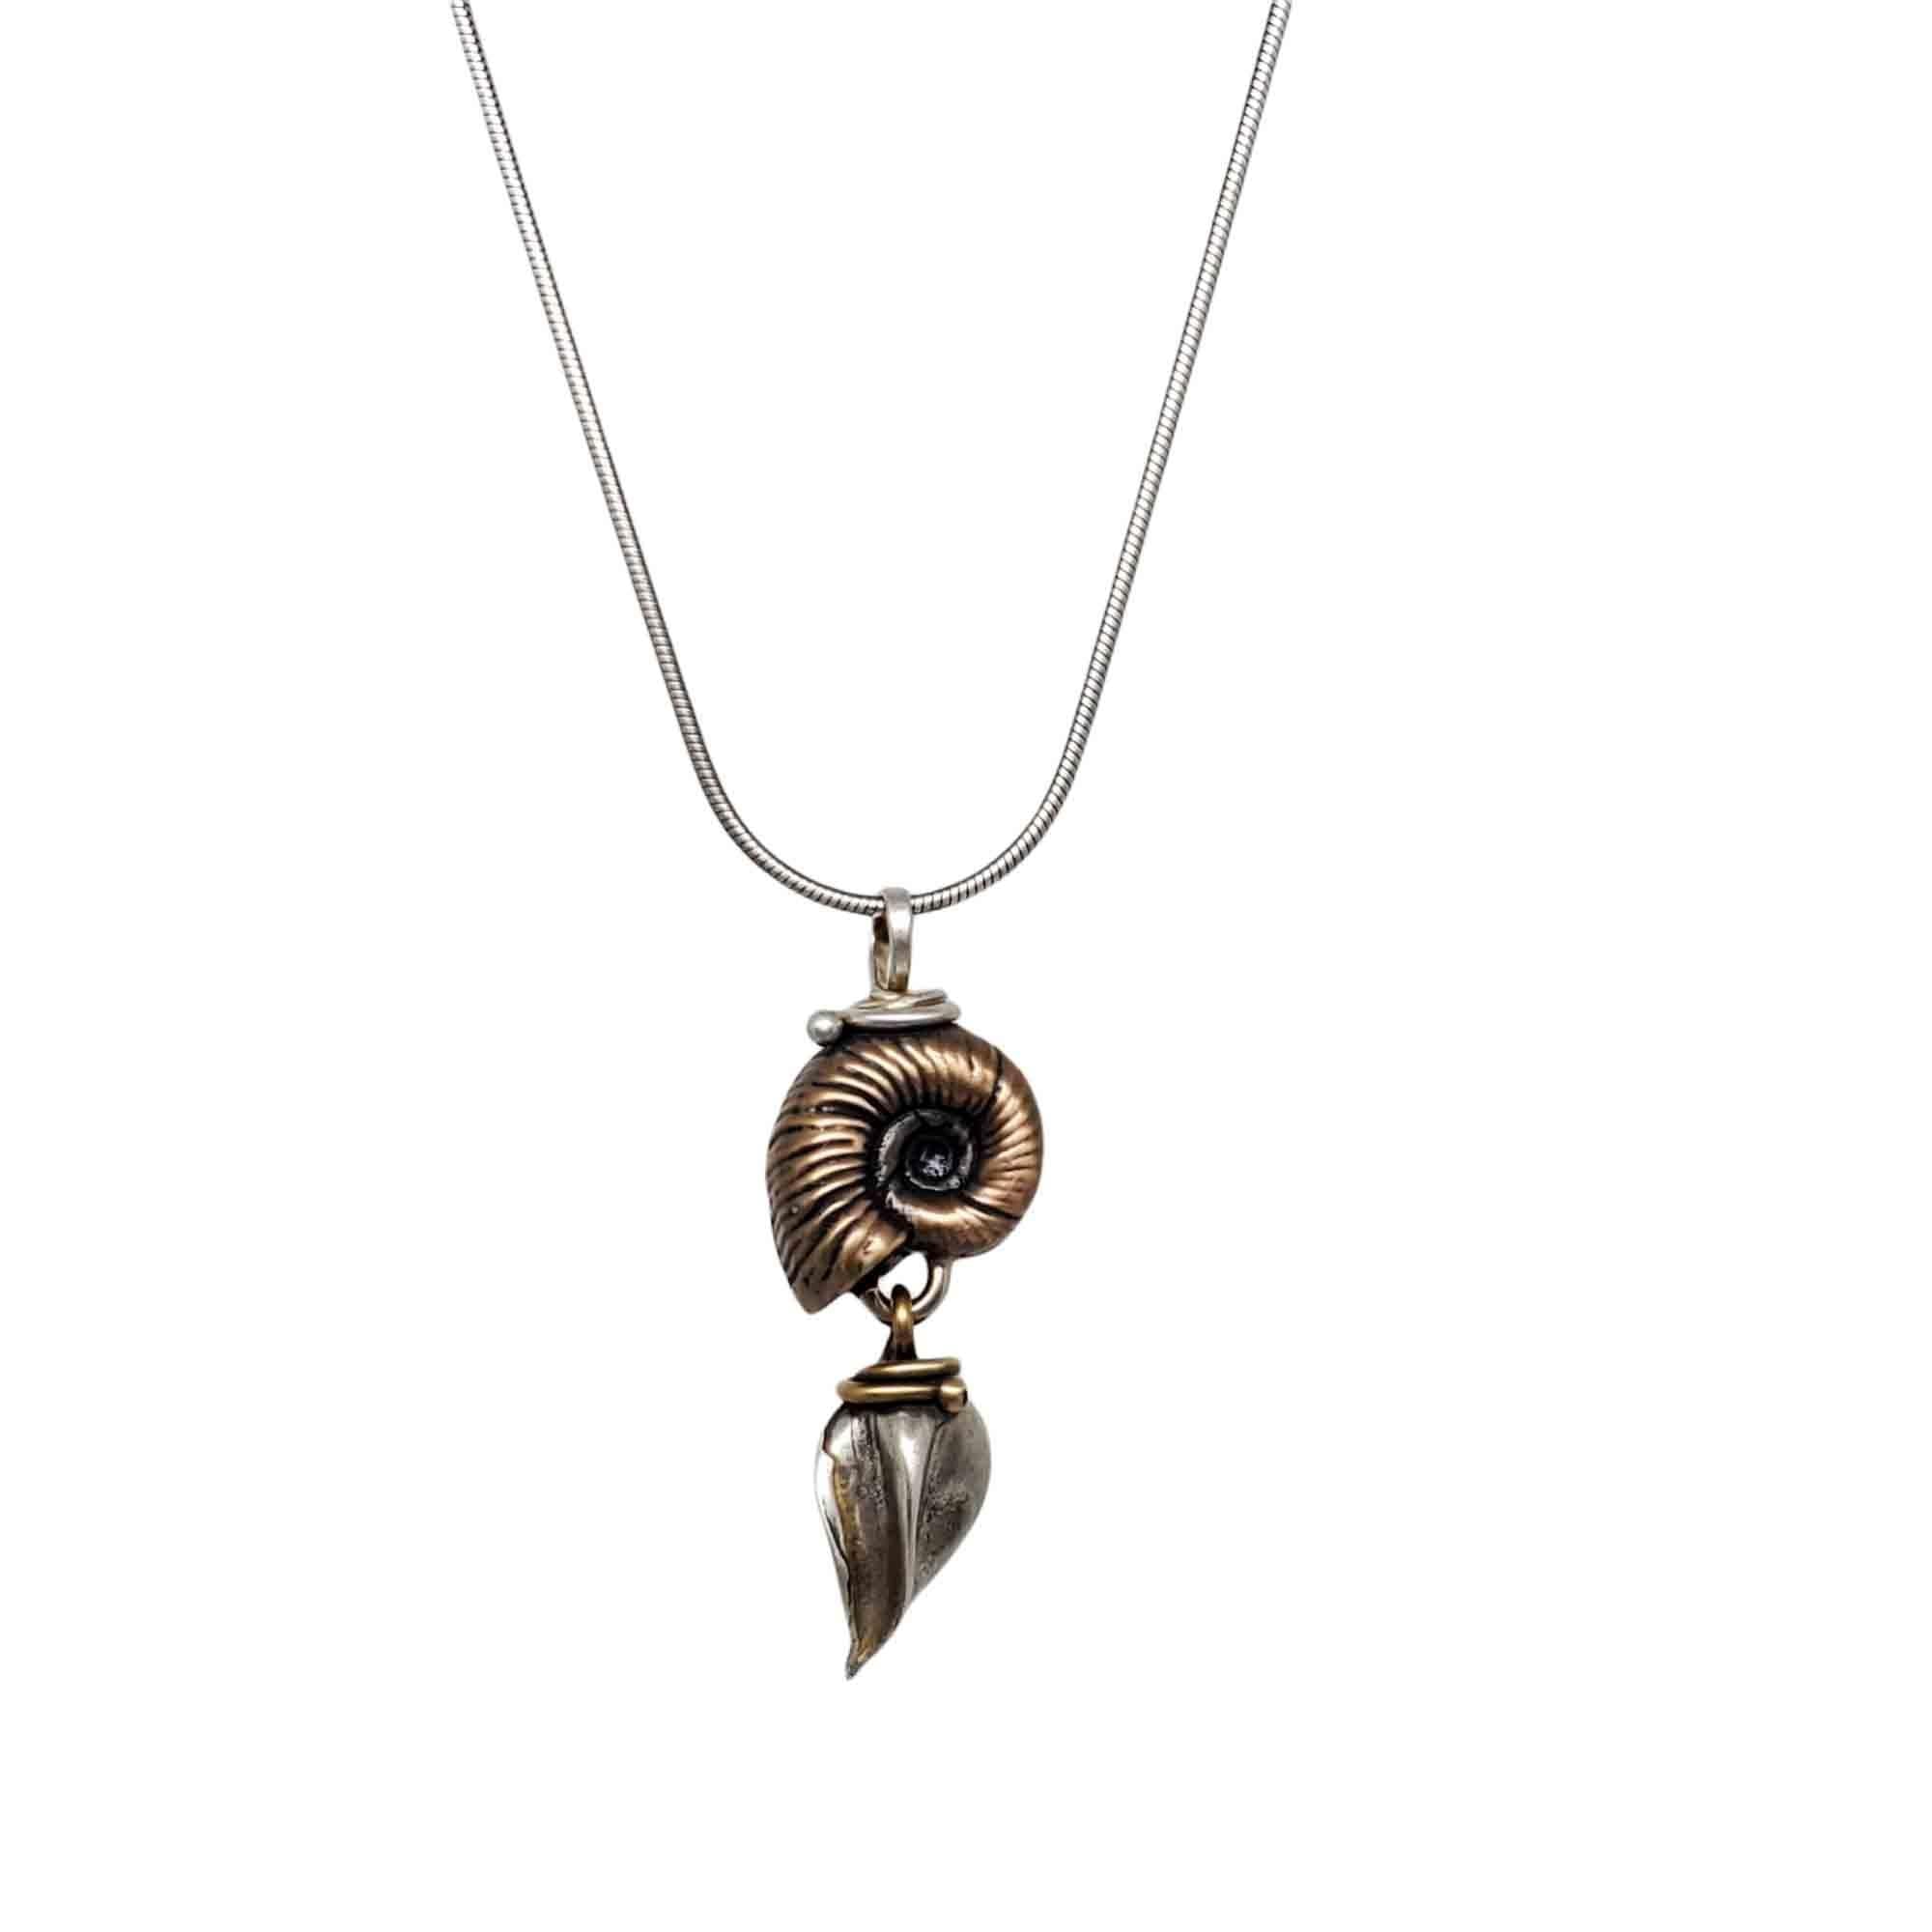 Necklace – Bronze Ammonite with Sterling Silver Seed Pod Pendant by Una Barrett